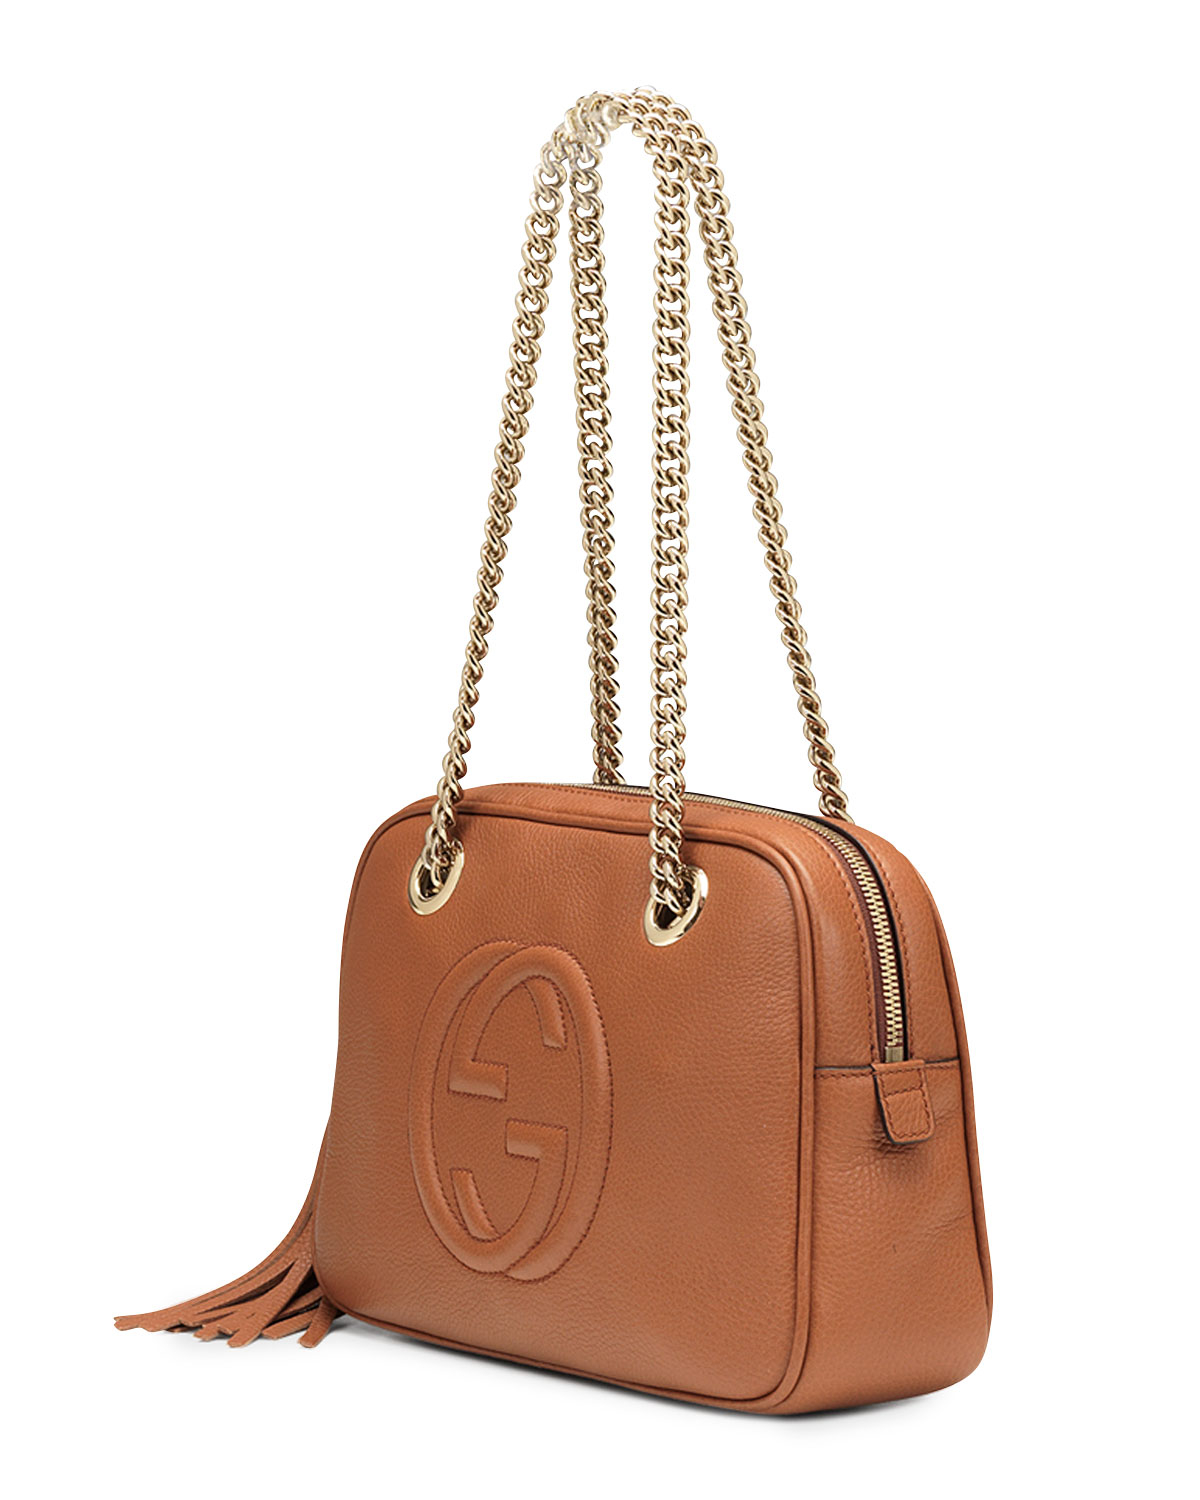 Gucci Soho Leather Doublechainstrap Shoulder Bag in Brown (TAN) | Lyst